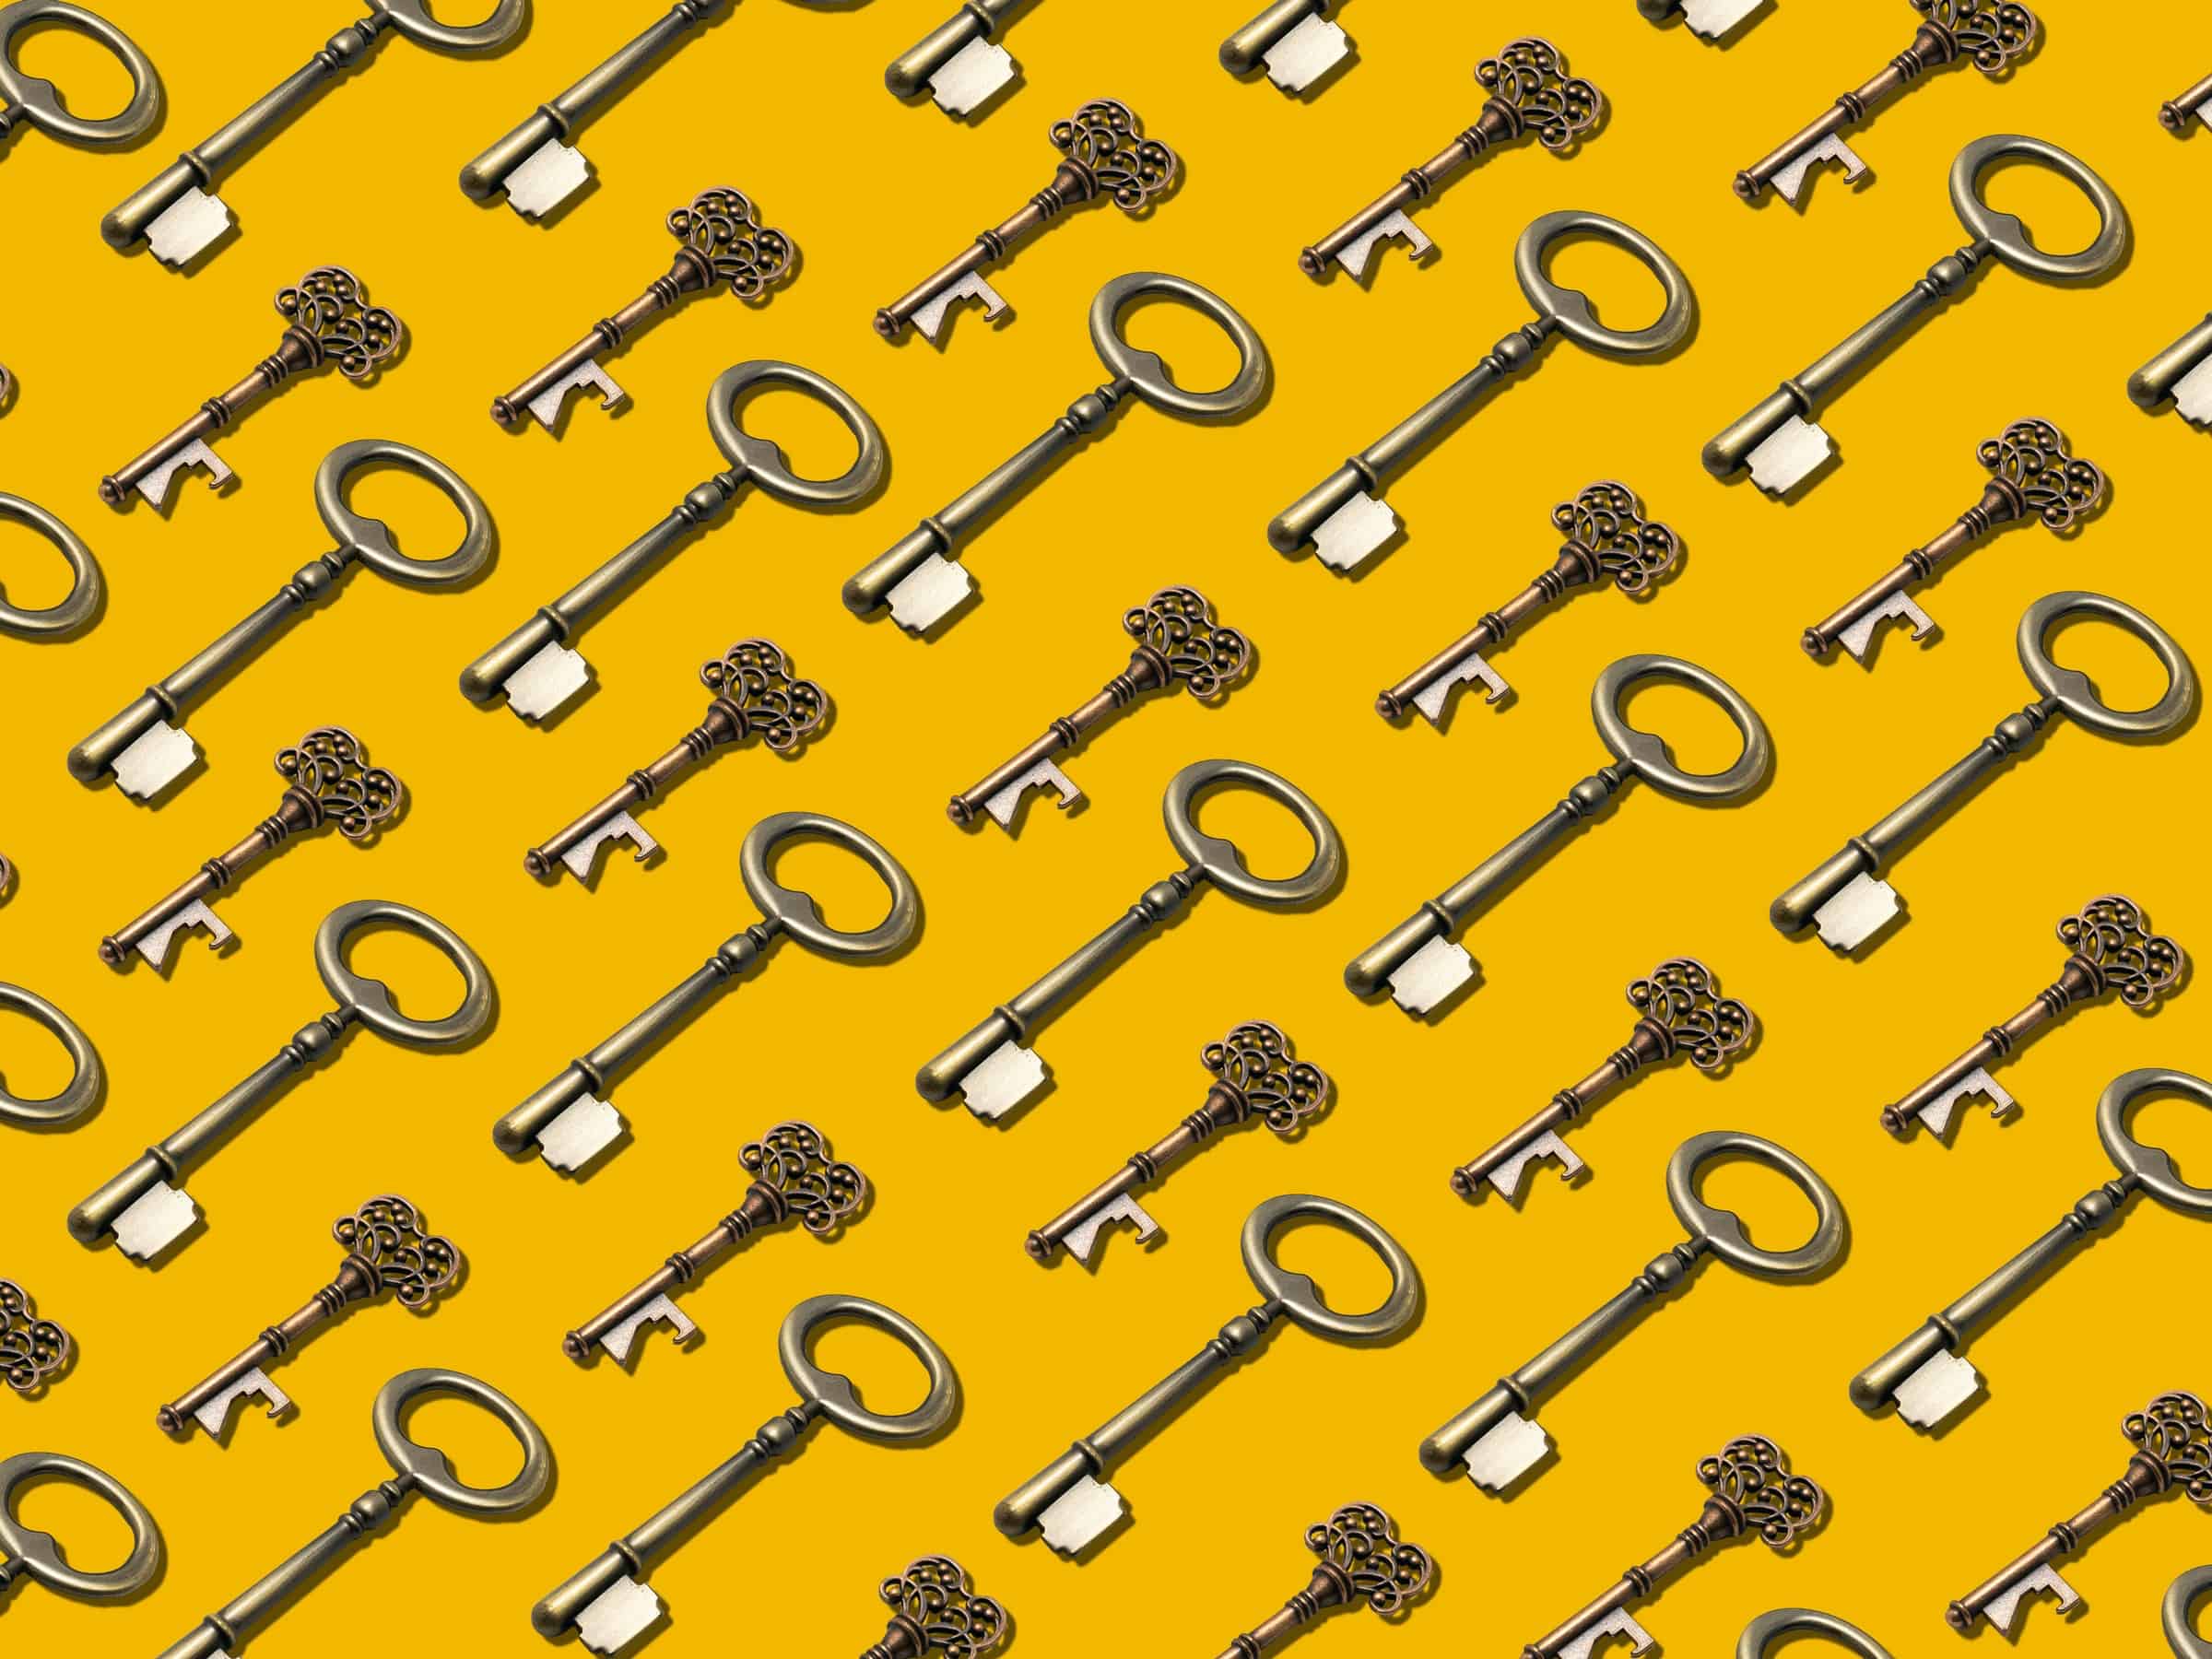 repeated pattern of keys on yellow background for strengthening customer communications article